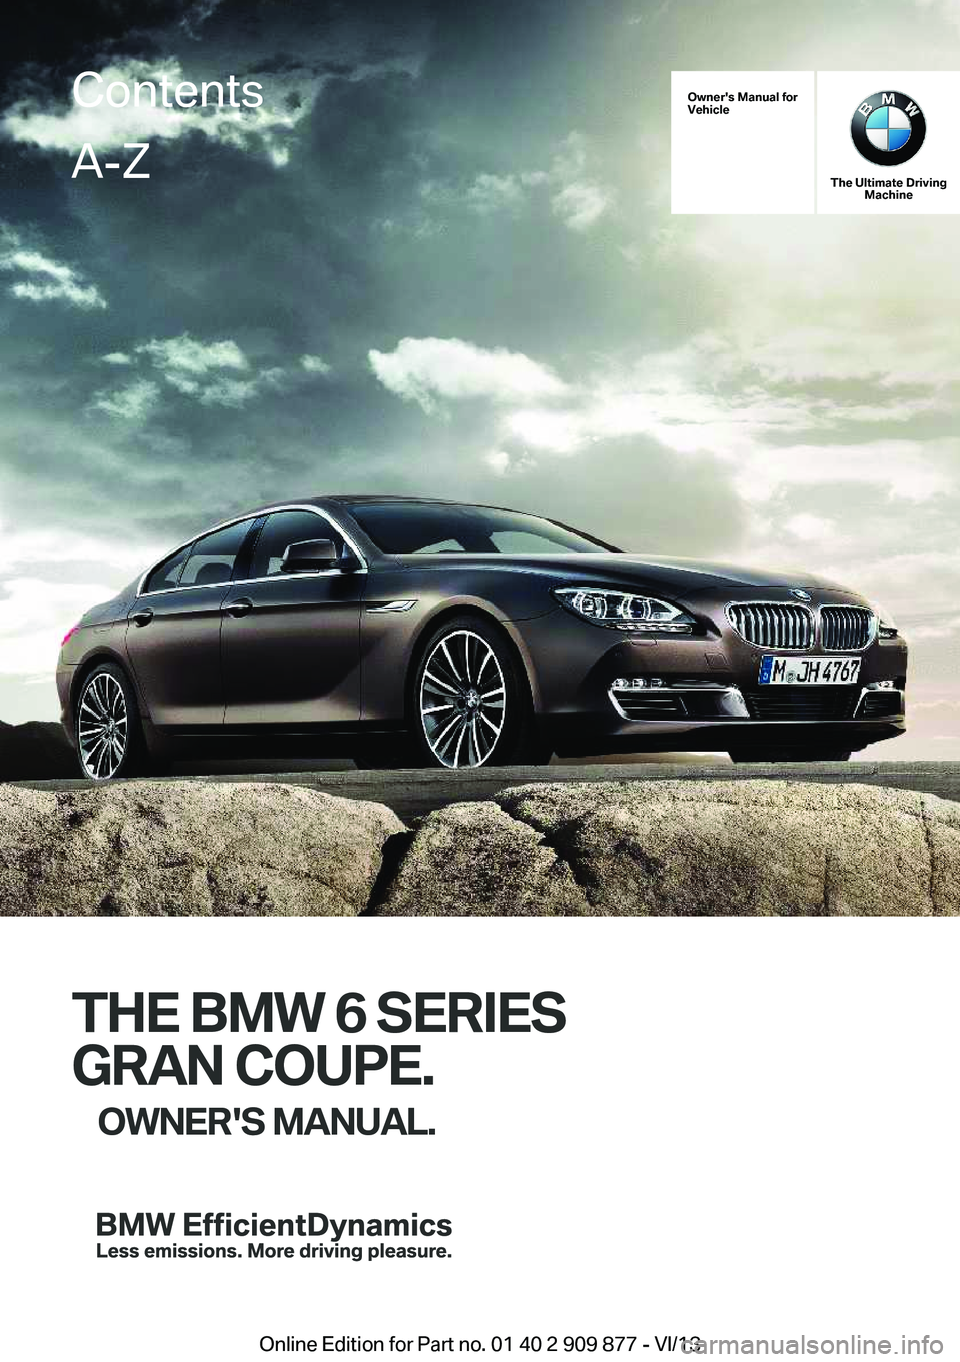 BMW 640I GRAN COUPE 2014  Owners Manual Owner's Manual for
Vehicle
The Ultimate Driving Machine
THE BMW 6 SERIES
GRAN COUPE. OWNER'S MANUAL.
ContentsA-Z
Online Edition for Part no. 01 40 2 909 877 - VI/13   